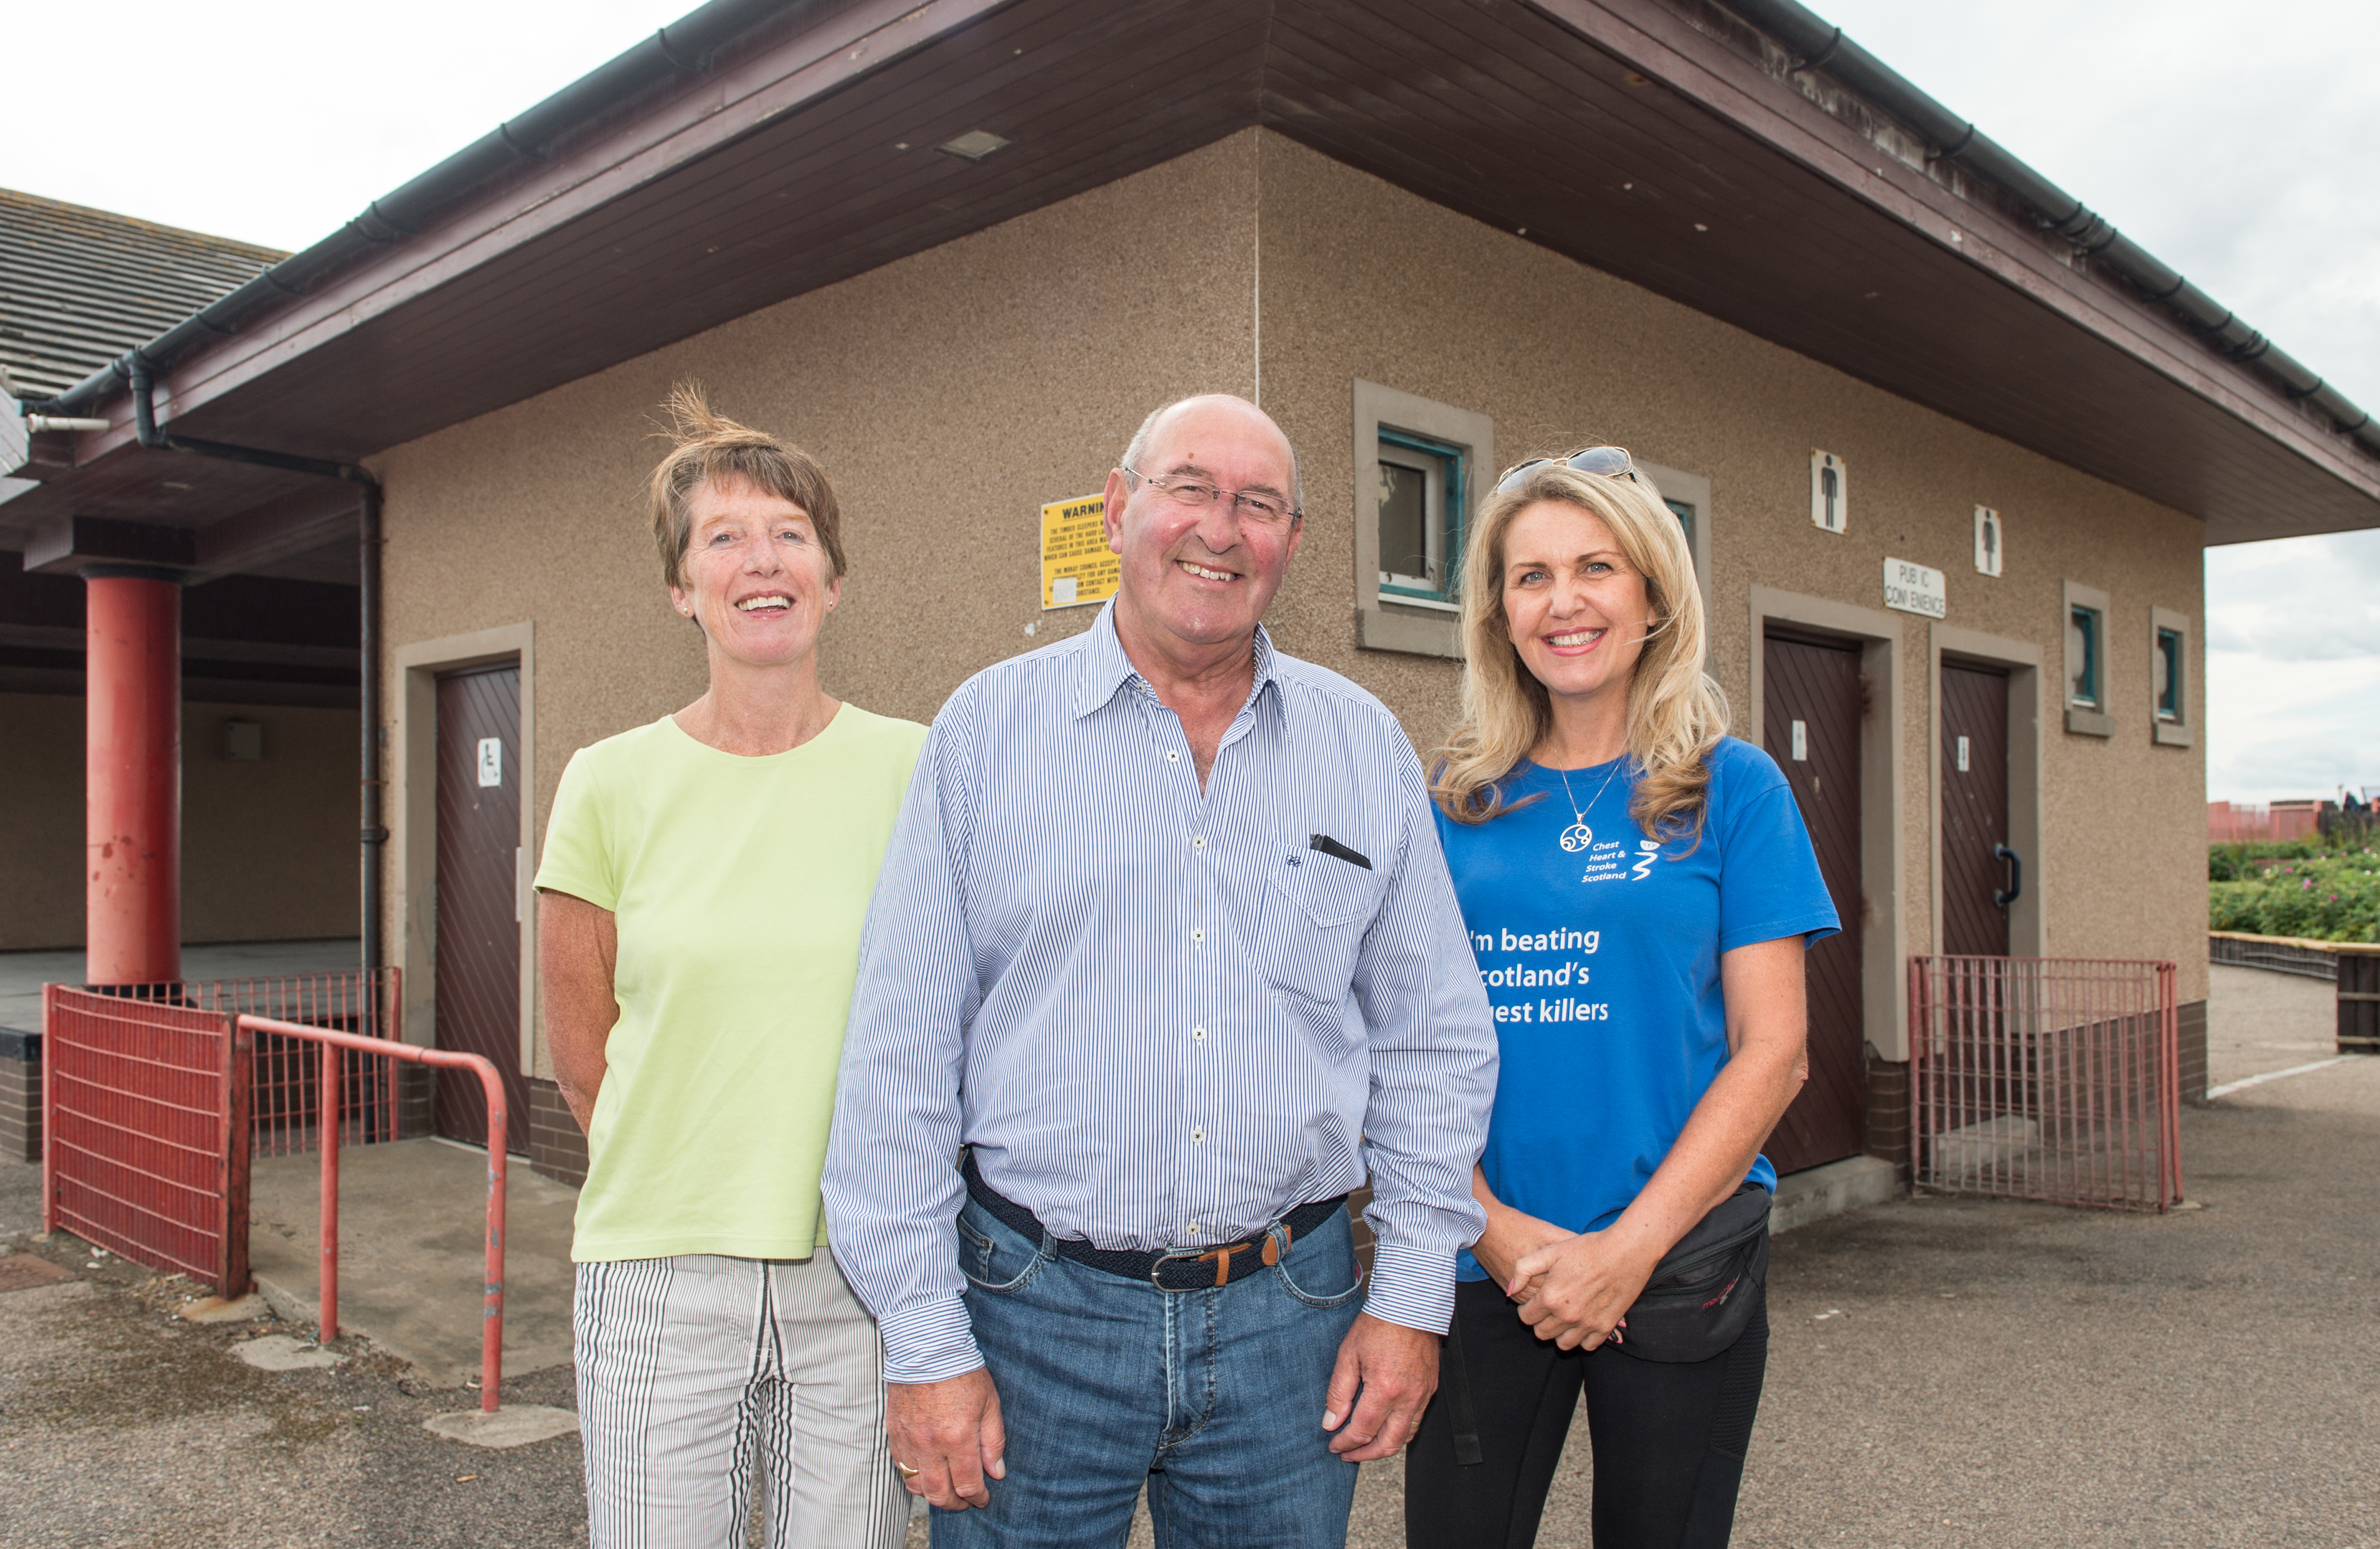 Lossiemouth Community Council members Marian Evansr, Mike Mullholland, and Carolle Ralph at the Station Park toilets.